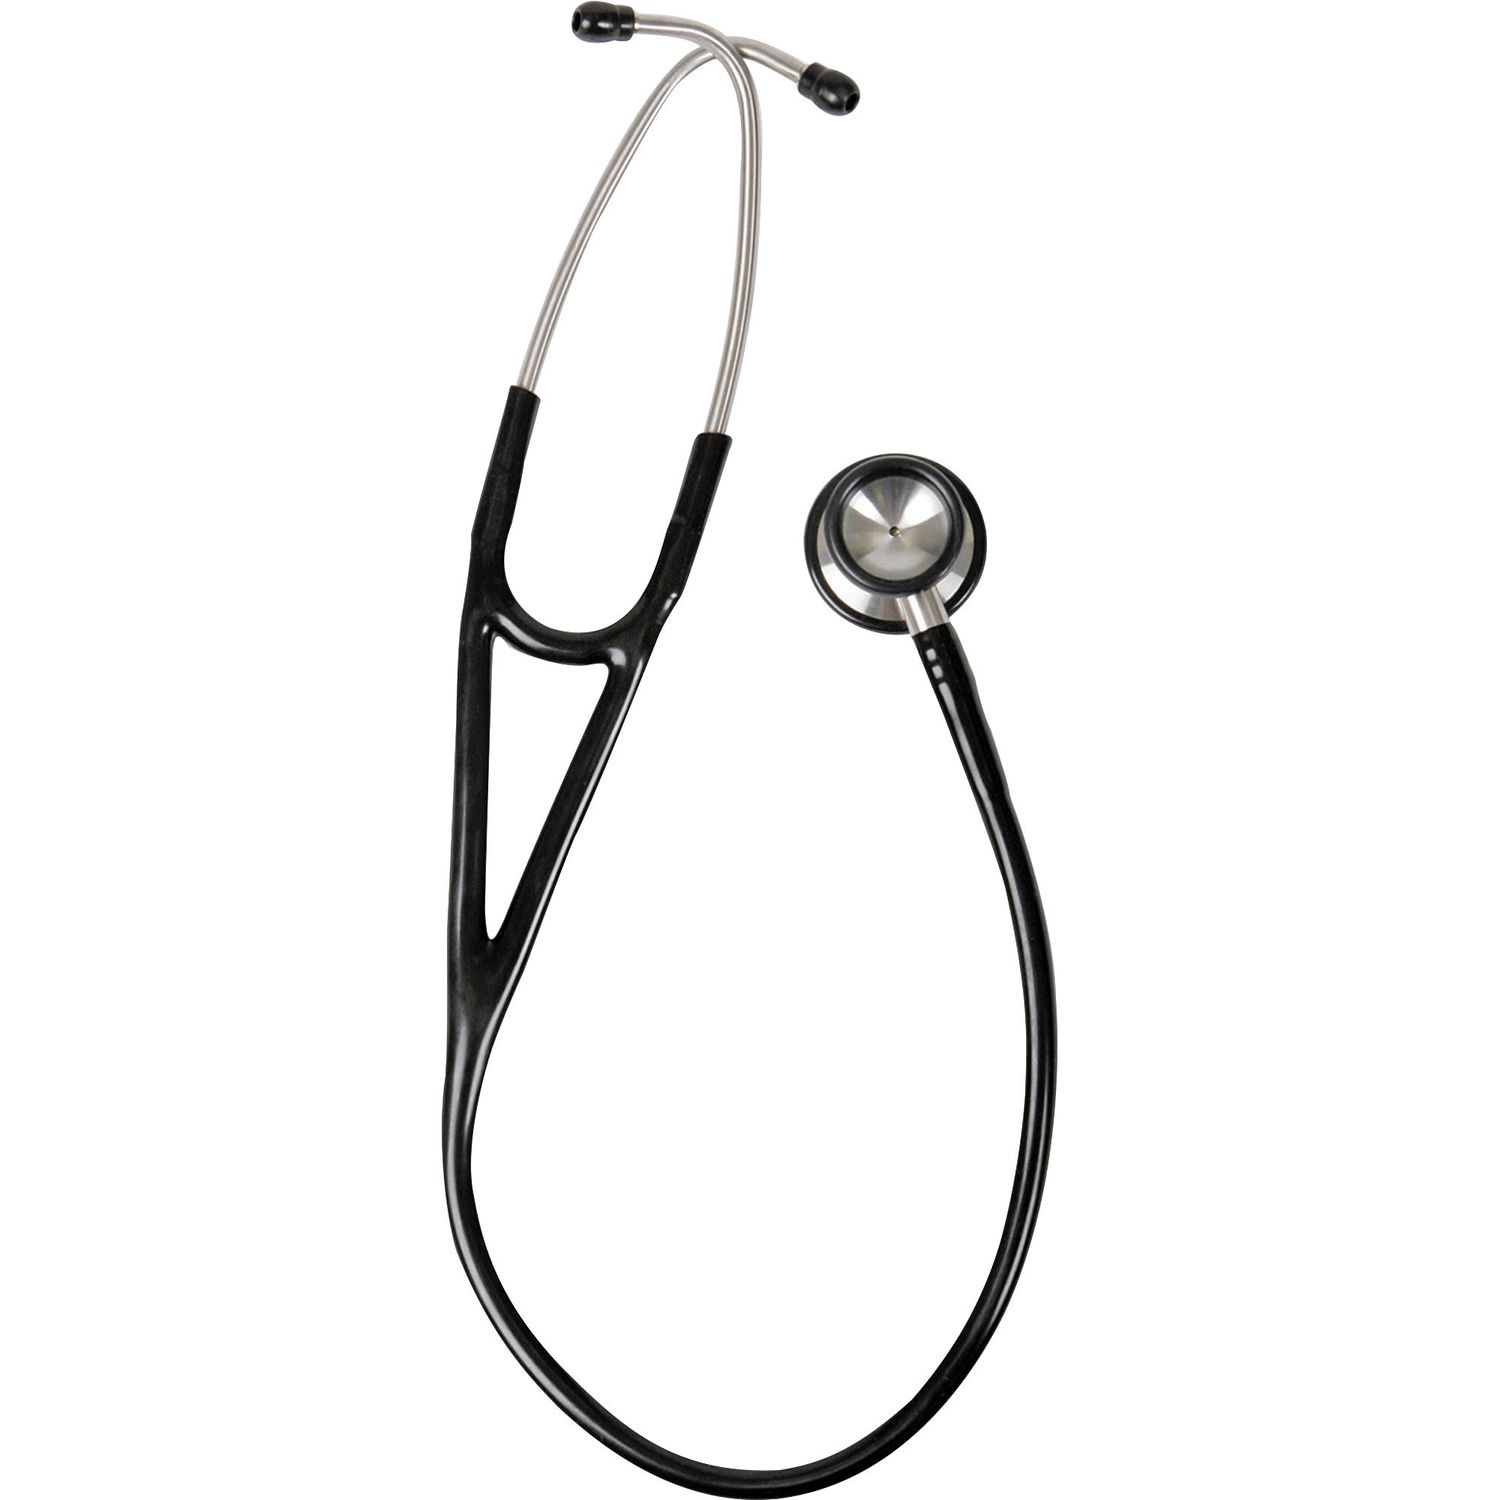 Accucare Cardiology Stethoscope Black